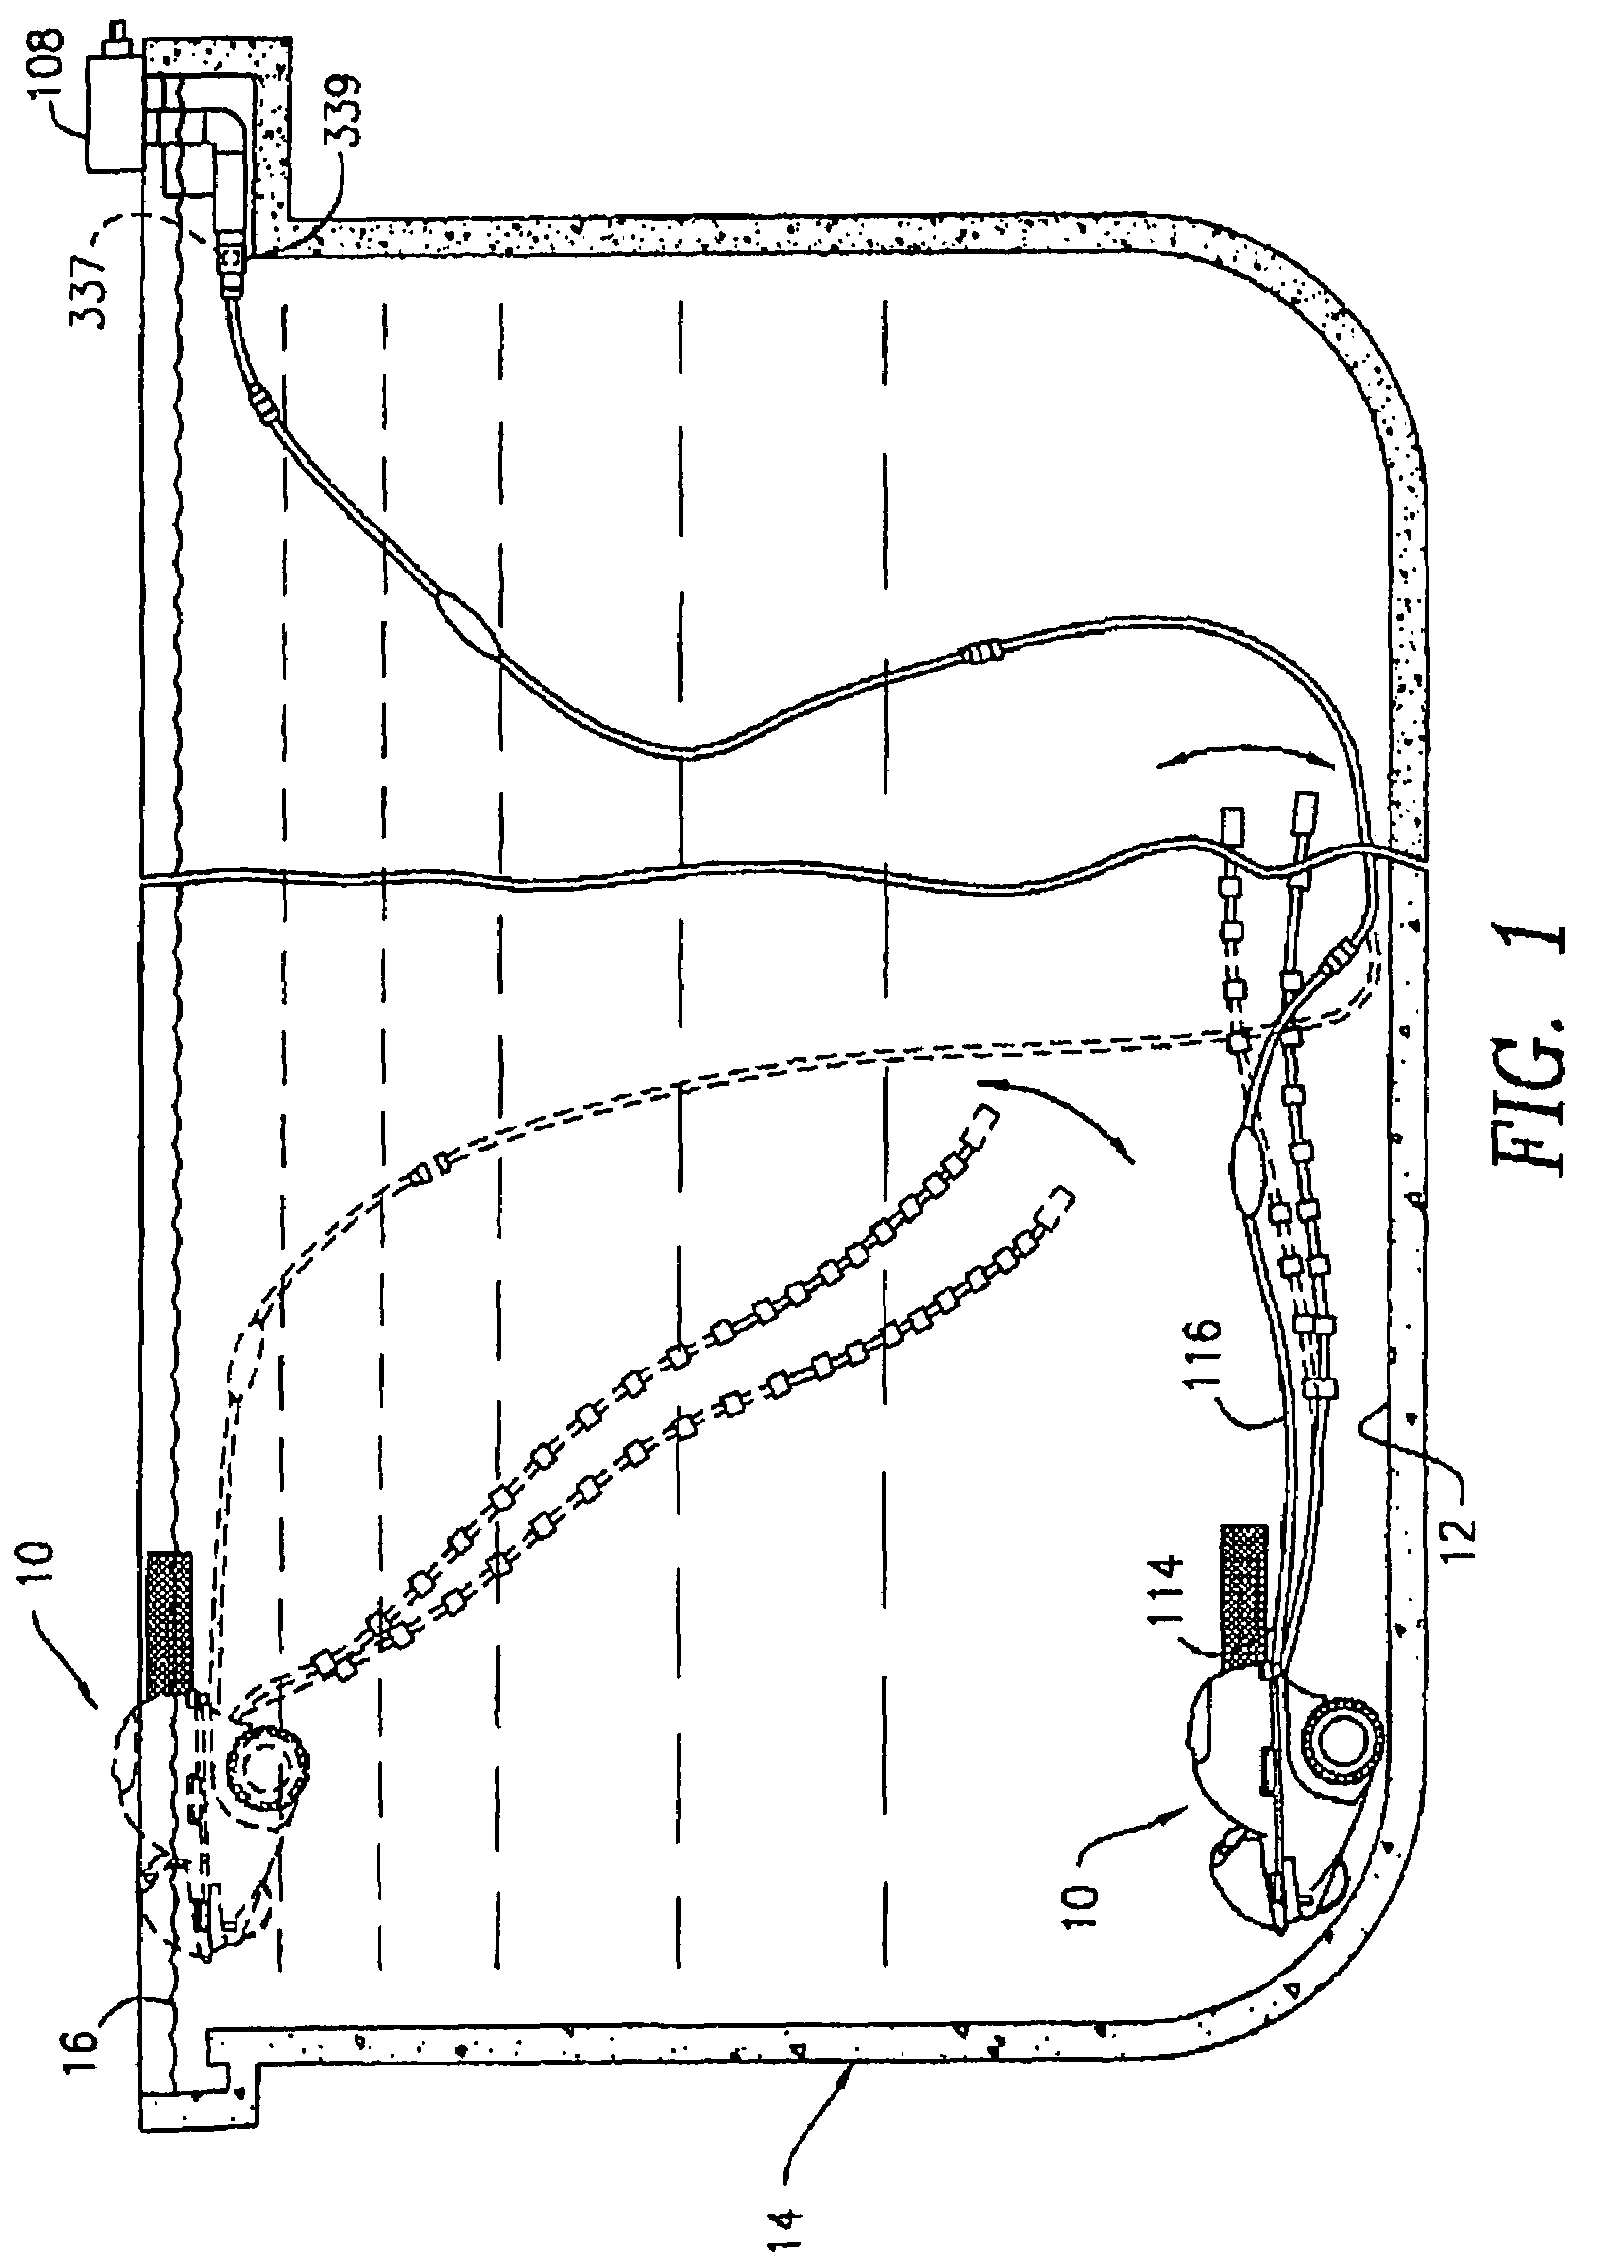 Fluid distribution system for a swimming pool cleaning apparatus